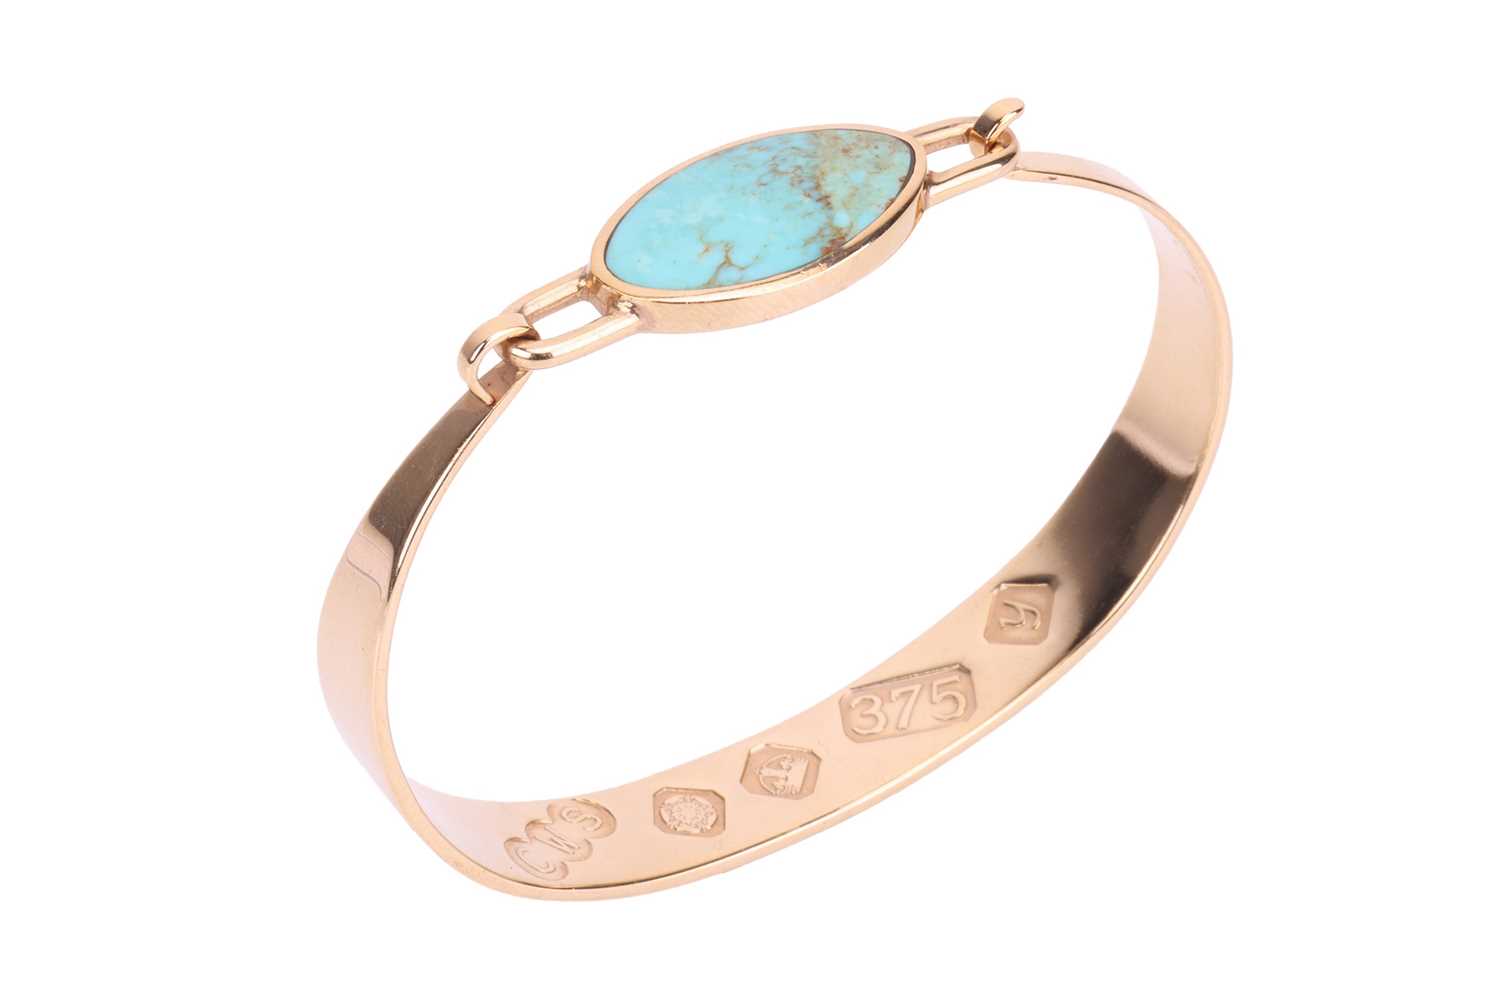 A turquoise-set bangle in 9ct yellow gold, tension clamp opening bracelet featuring a navette-shaped - Image 2 of 5